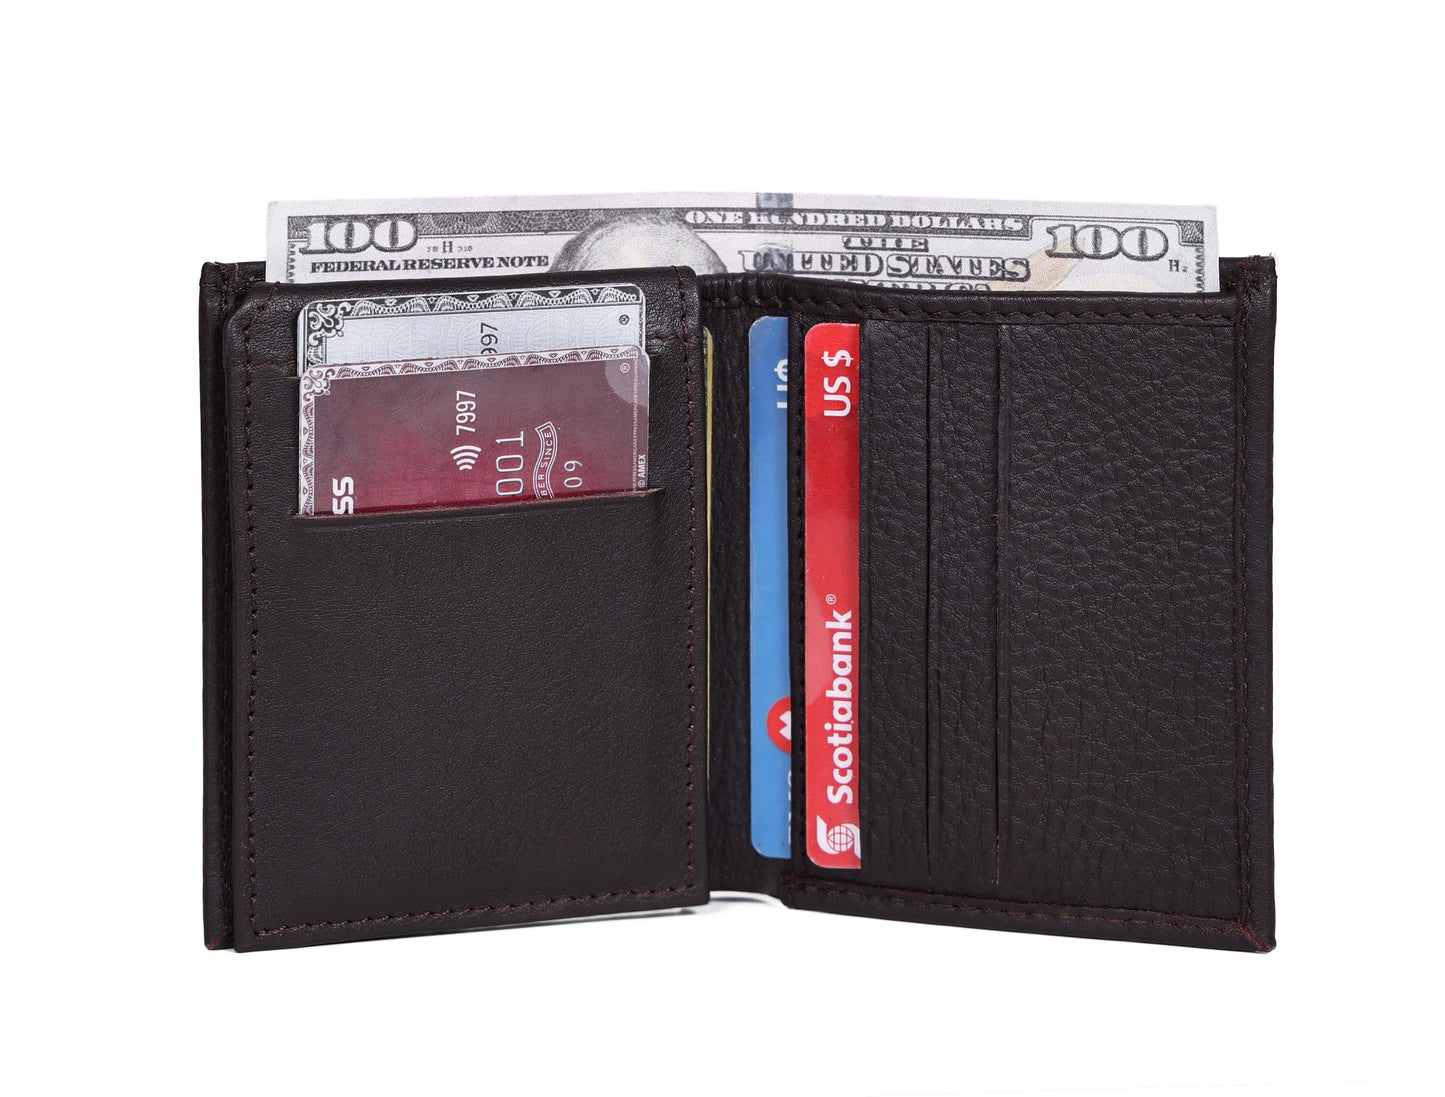 Introducing our Leather Wallet – A Timeless Classic, Art:- LA-1404